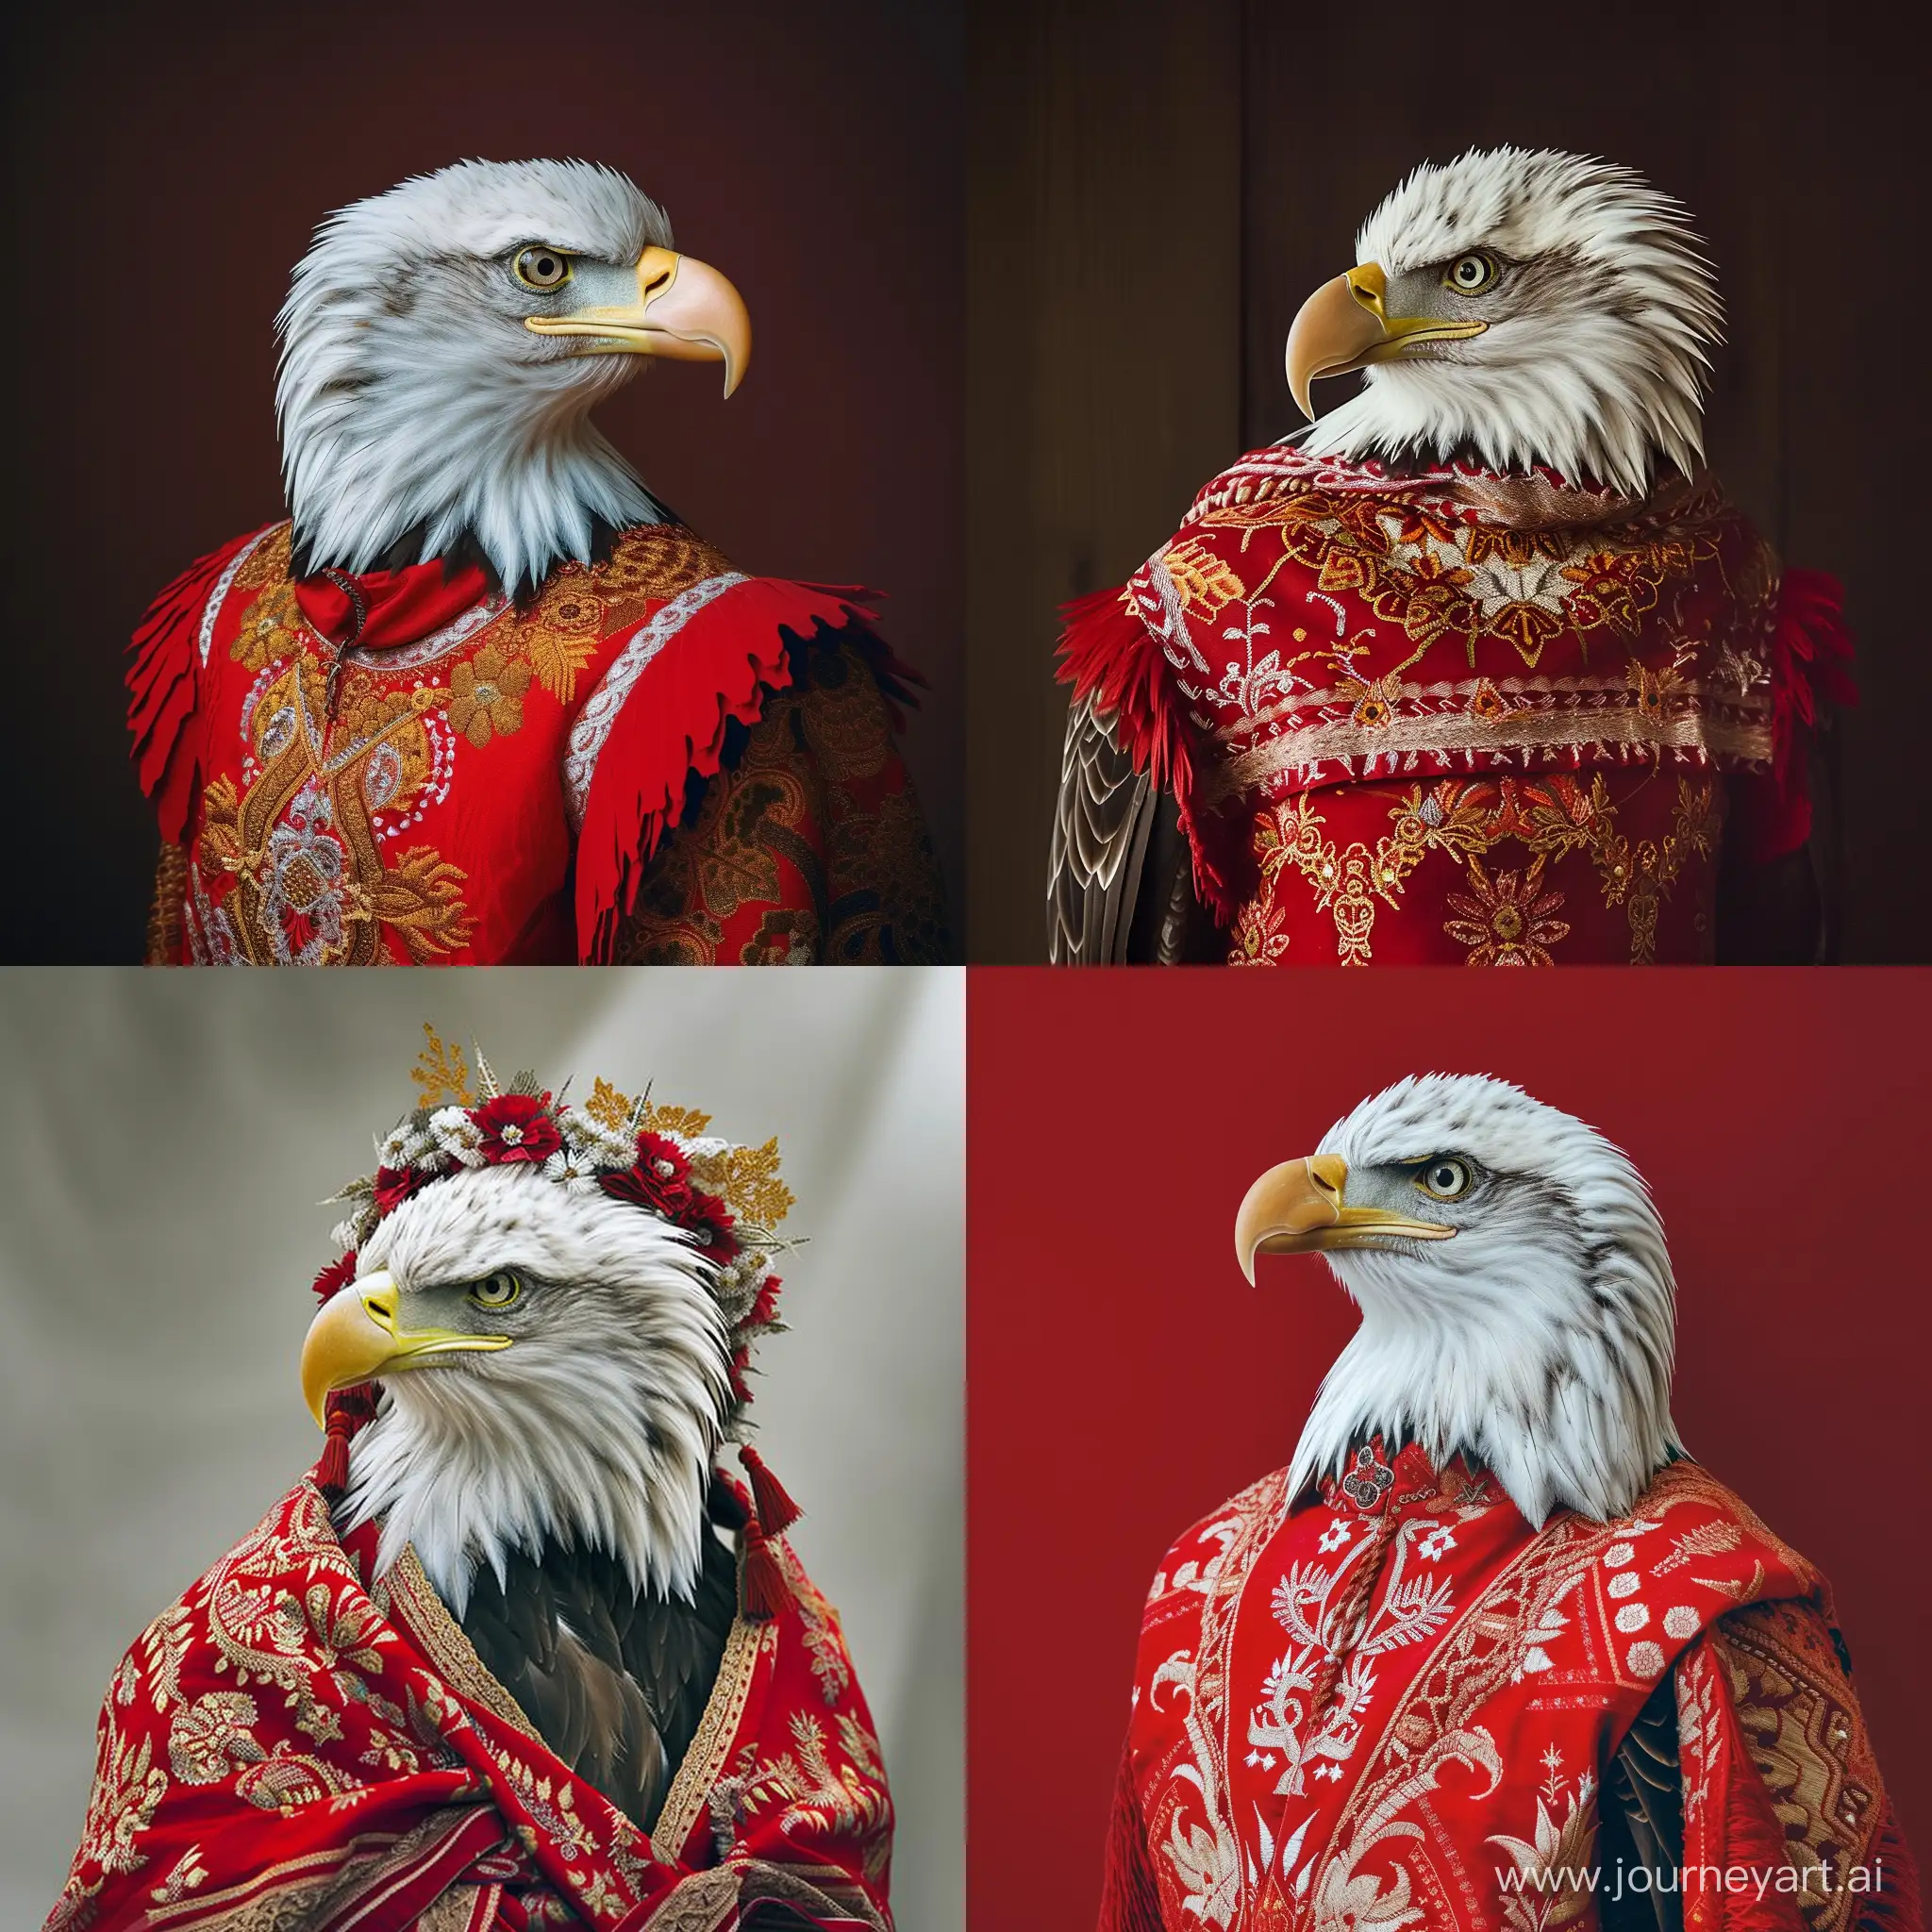 An American bald eagle dressed in Slavic national clothes of red and white colors